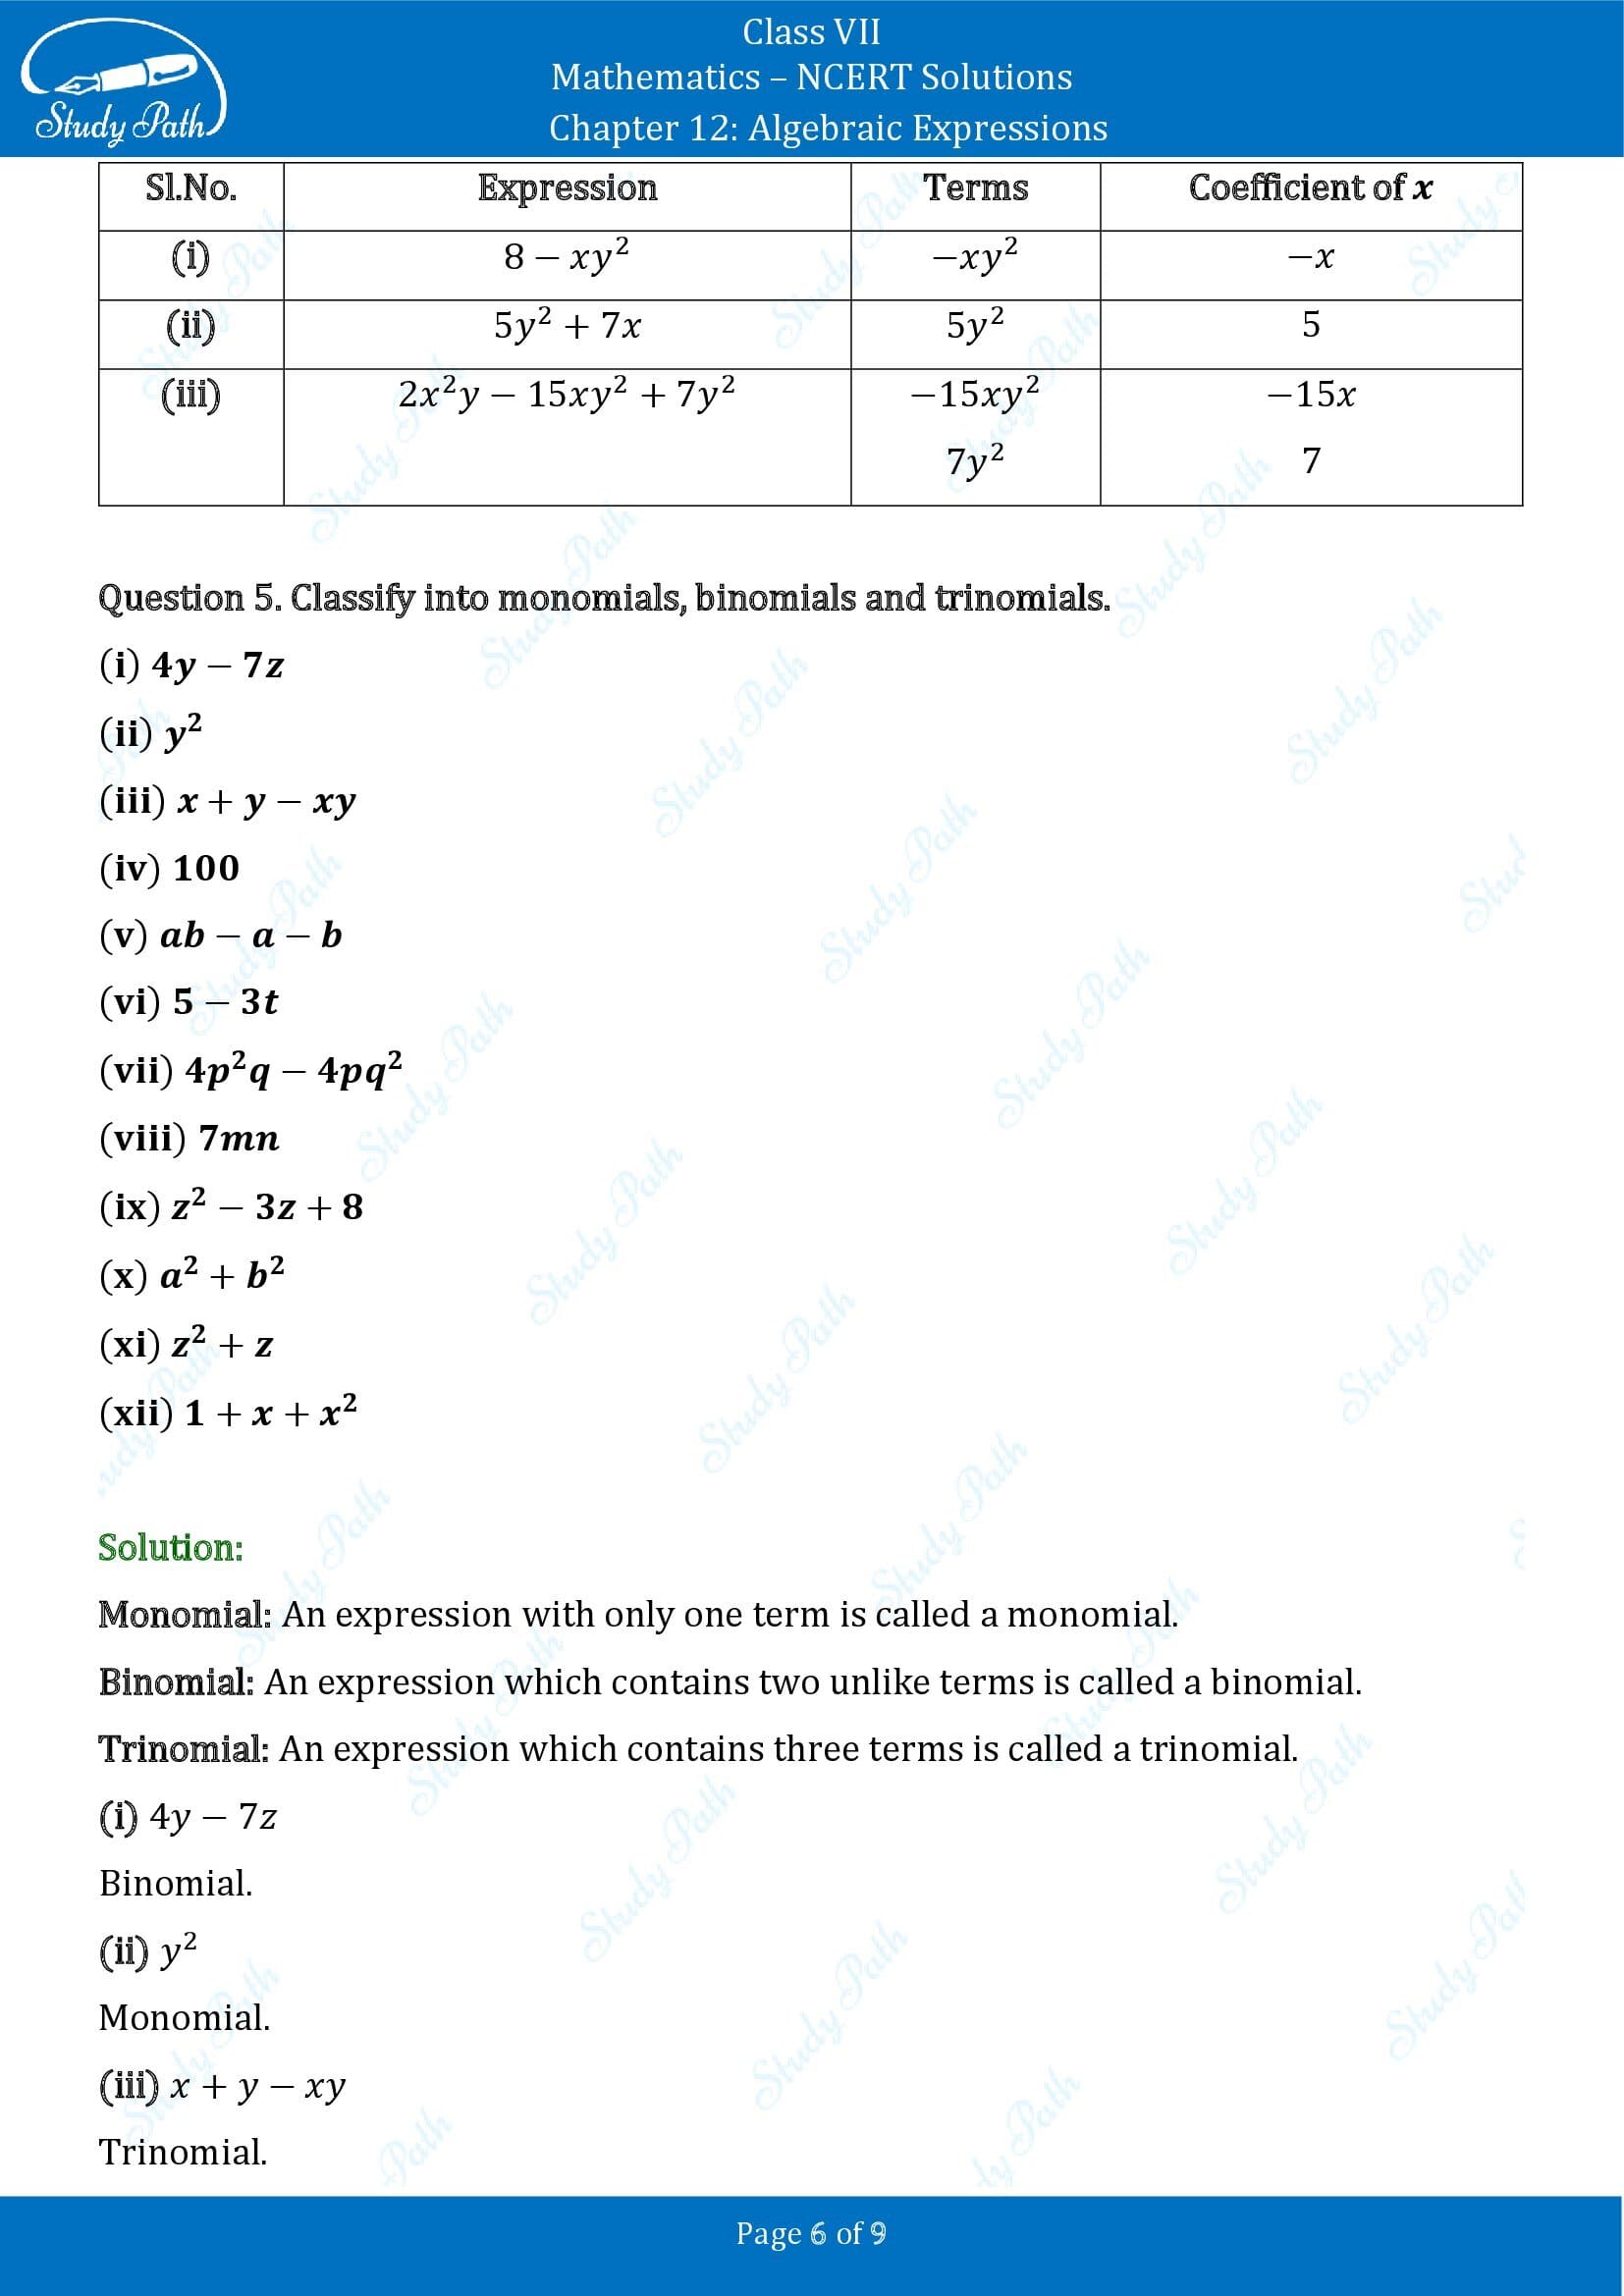 NCERT Solutions for Class 7 Maths Chapter 12 Algebraic Expressions Exercise 12.1 00006